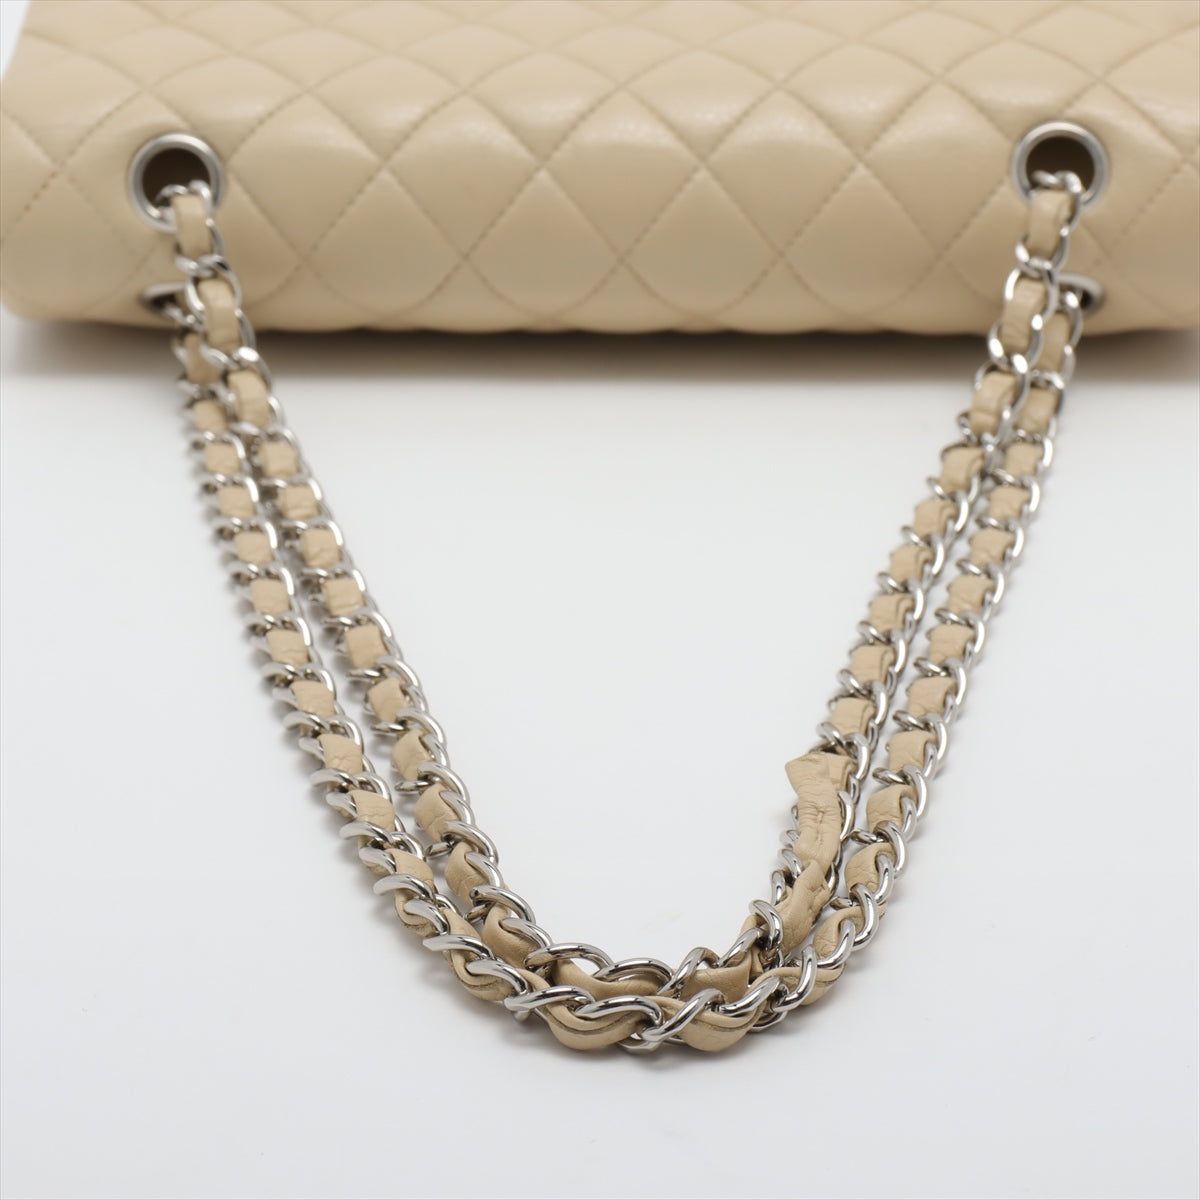 [Individual packaging] Chanel Matelasse Caviarskin Double flap Double chain bag Beige Silver Metal fittings 15849799   Leather repainted The inside edge is slightly solid